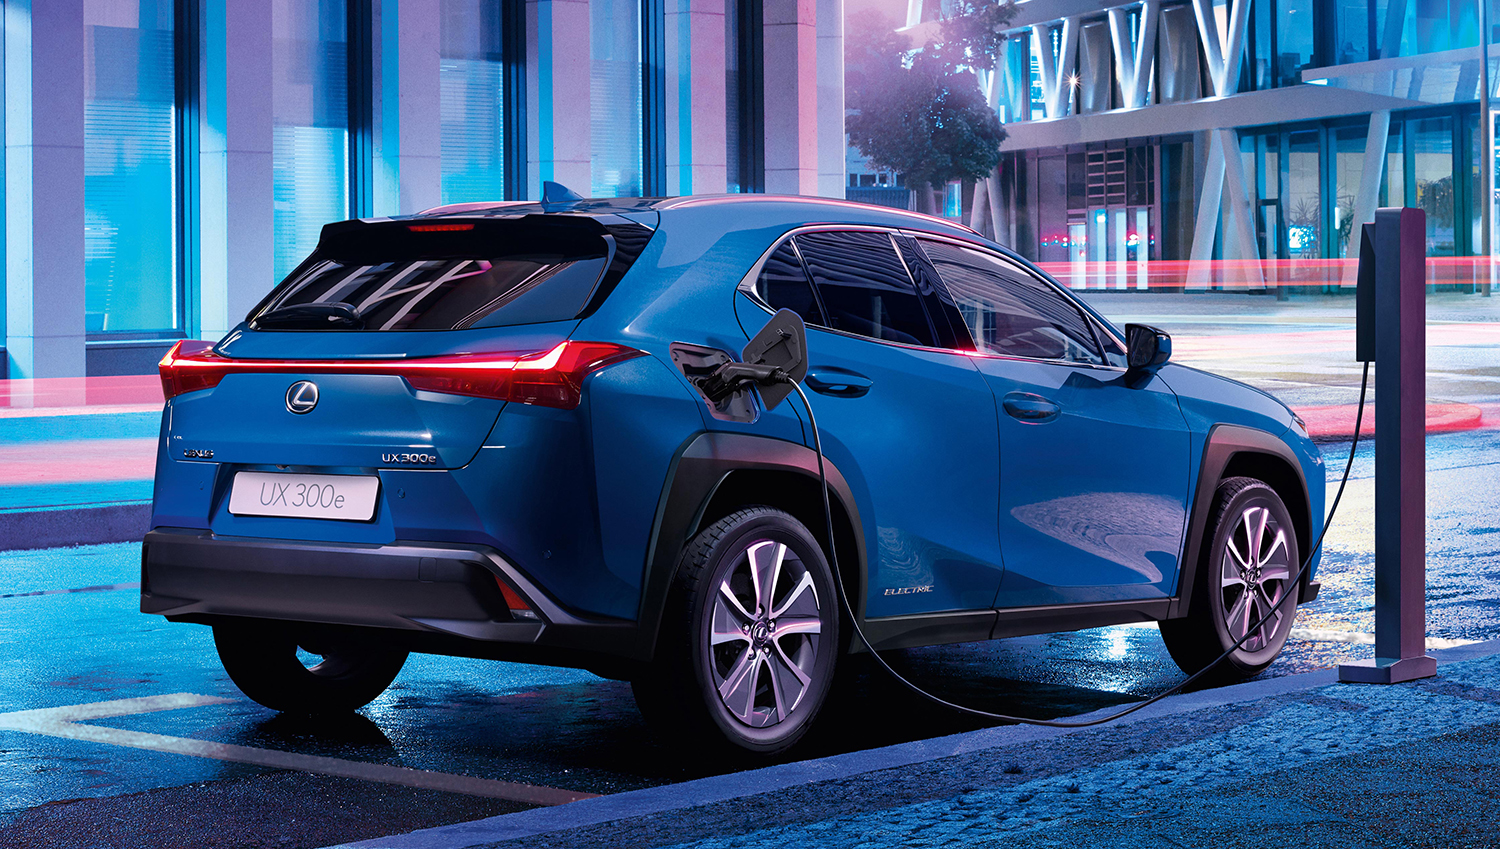 EUROPEAN DEBUT OF LEXUS’ FIRST ALL-ELECTRIC VEHICLE, THE UX 300E